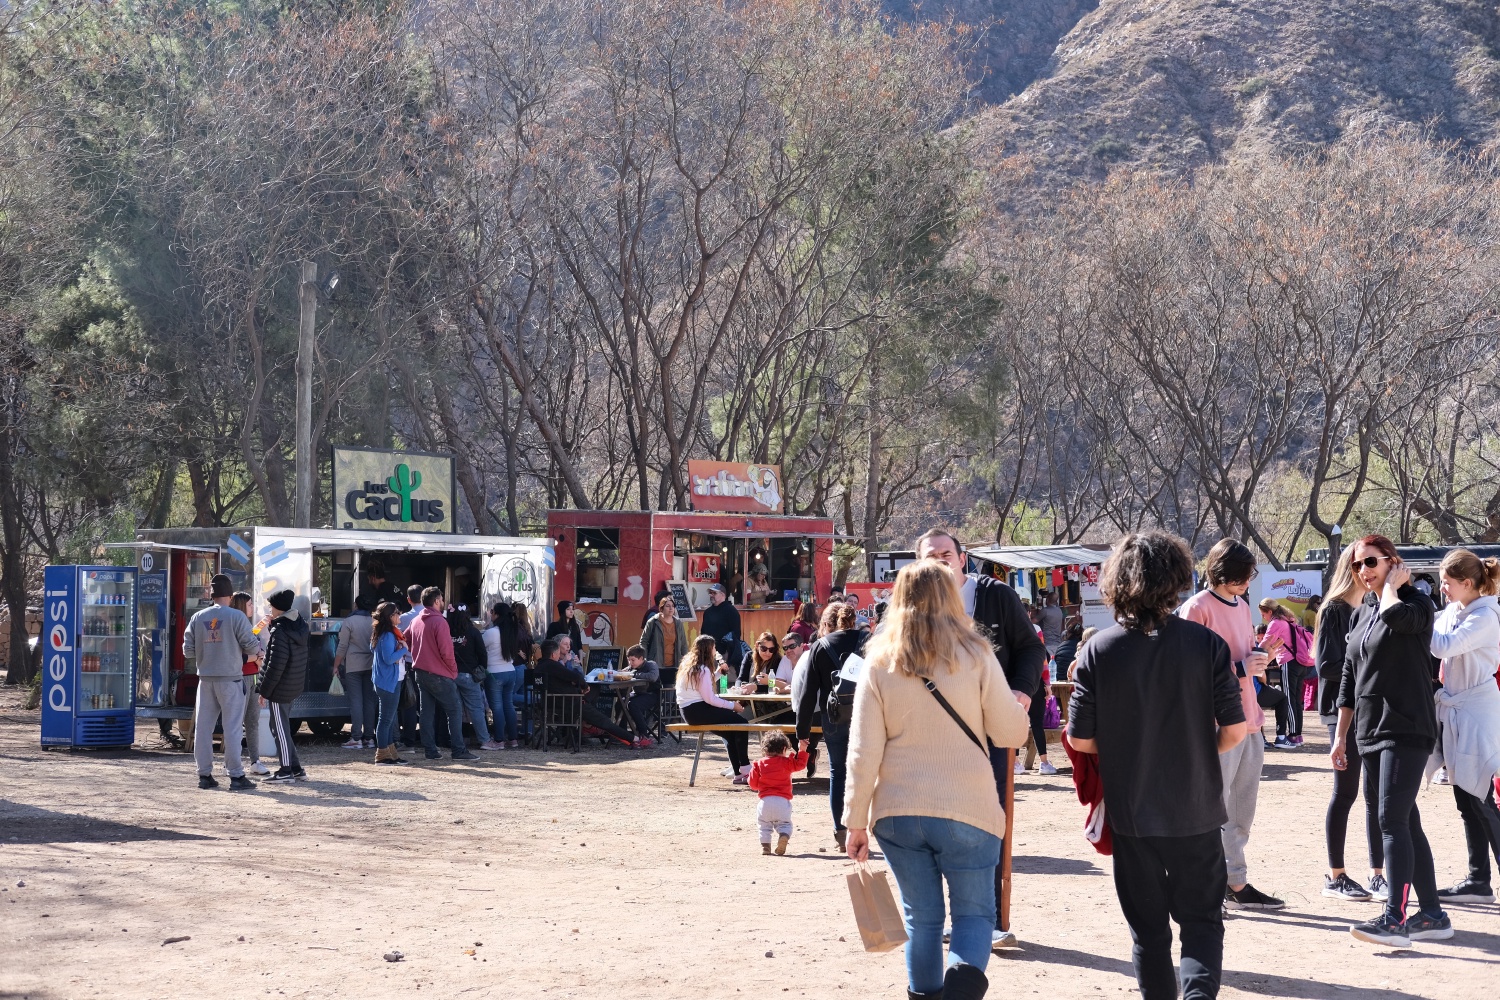 Some foodtrucks outside the chocolate tent